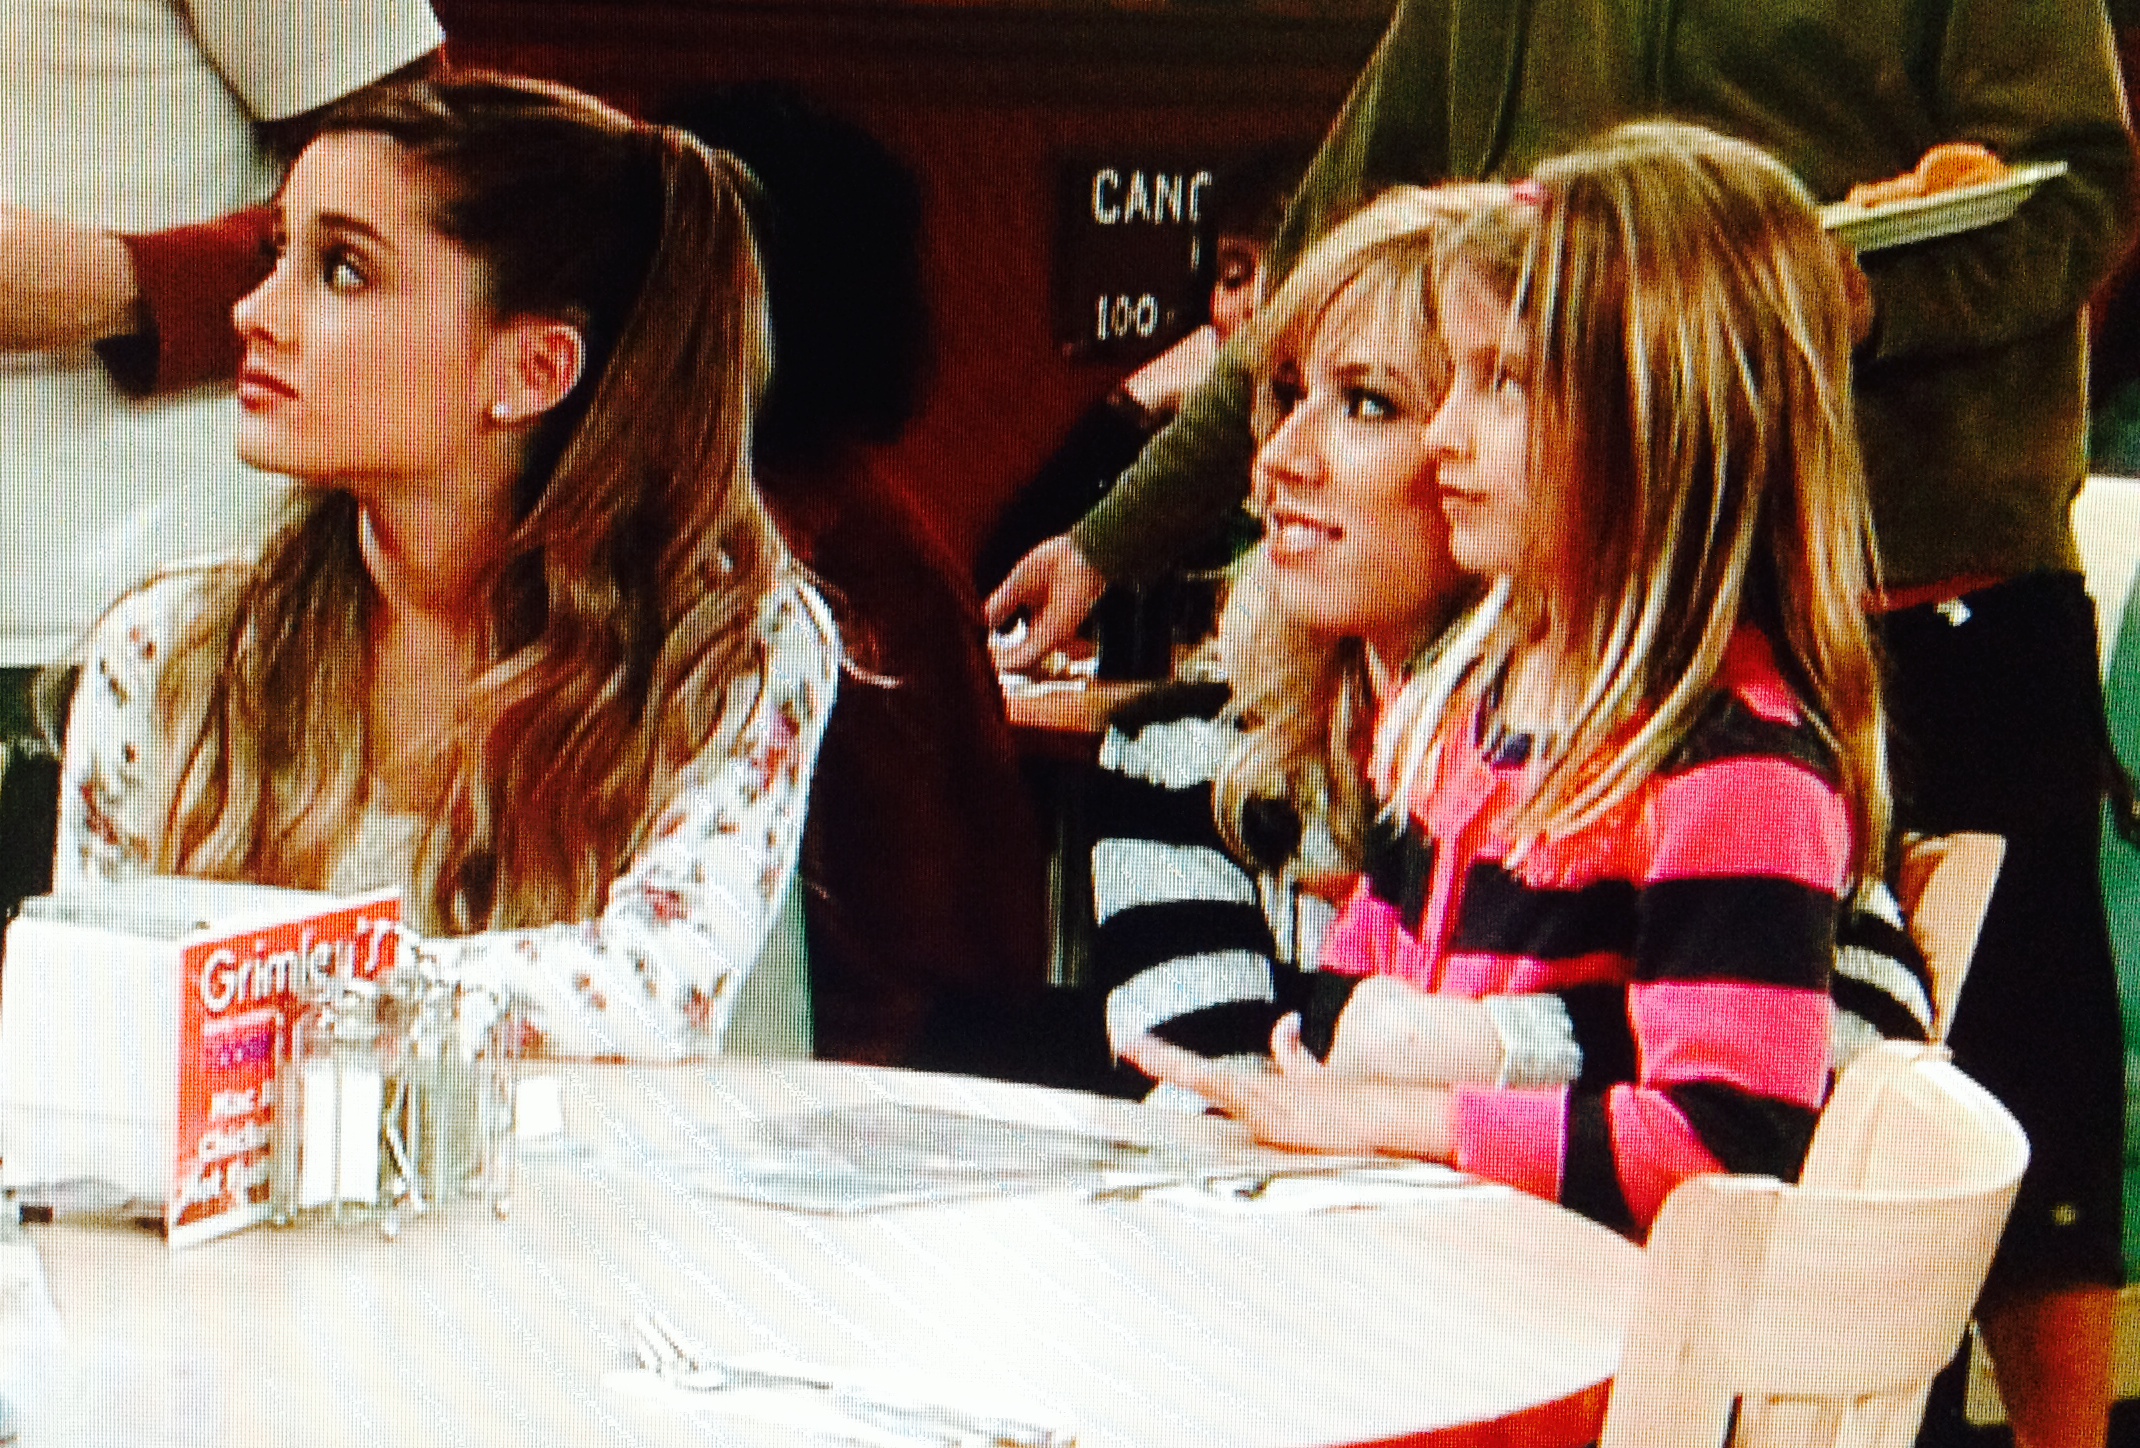 SAM&CAT, best baby sitters ever!